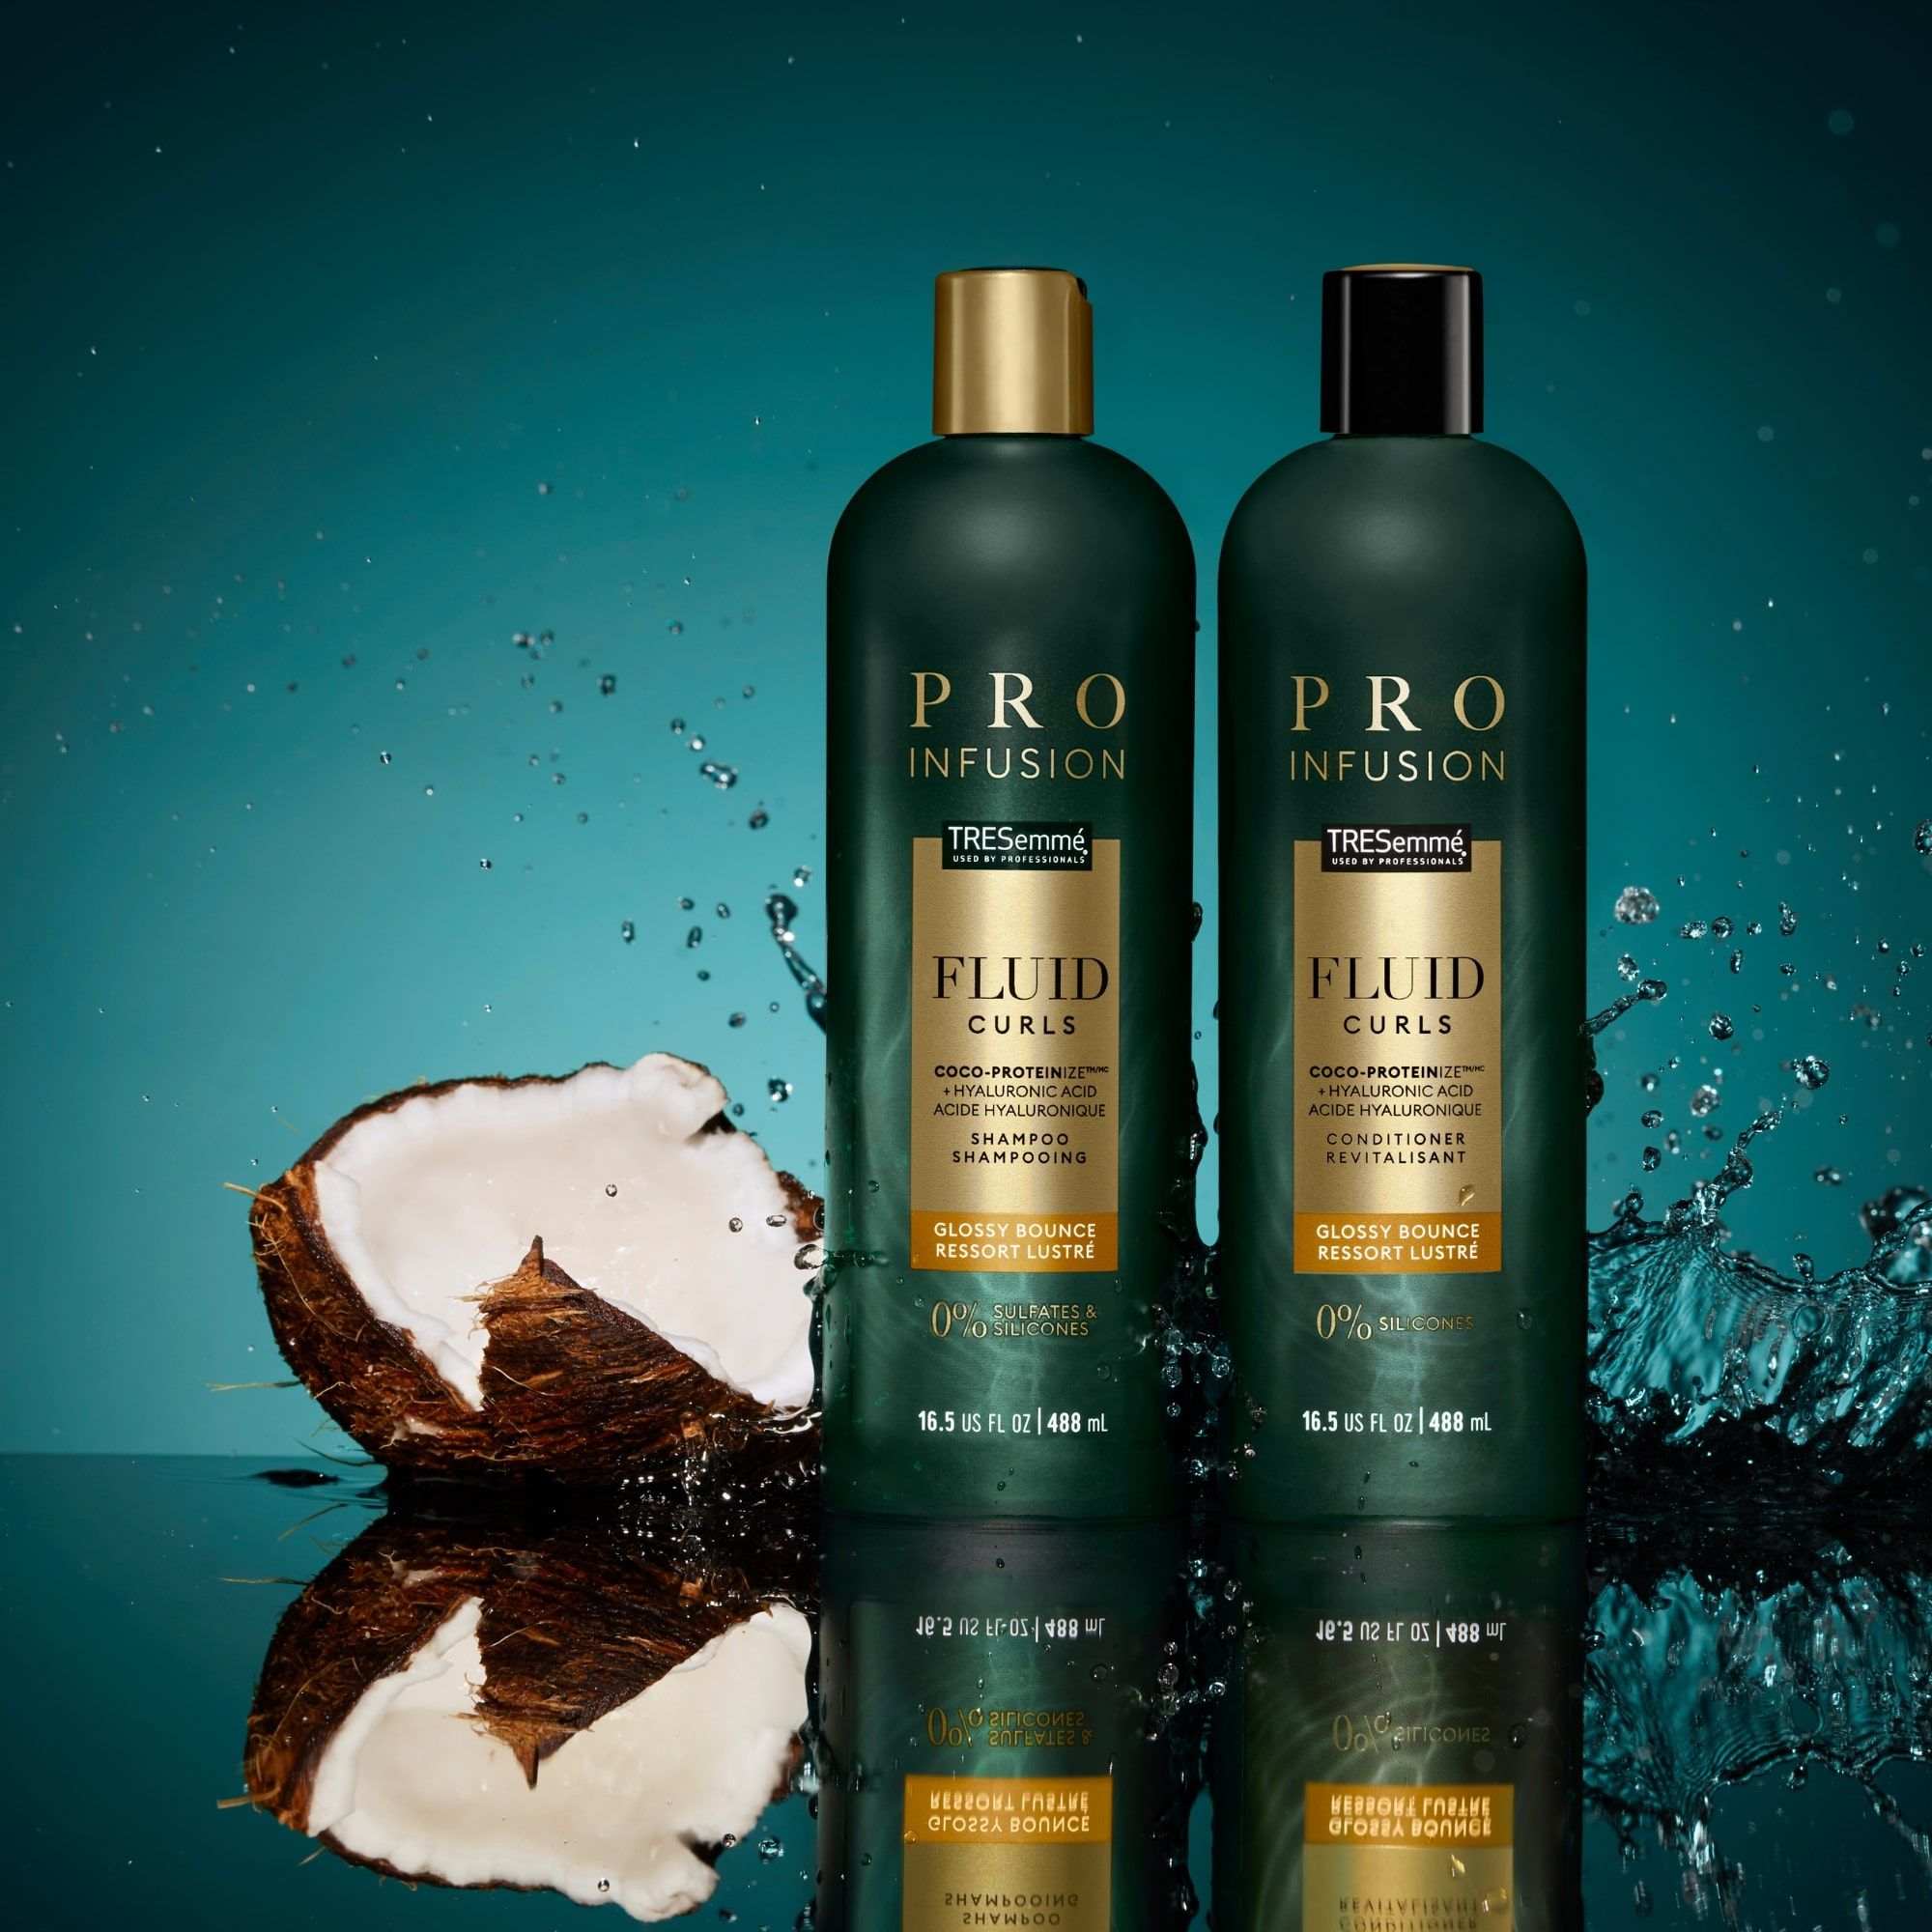 Pro Infusion Fluid Curls products